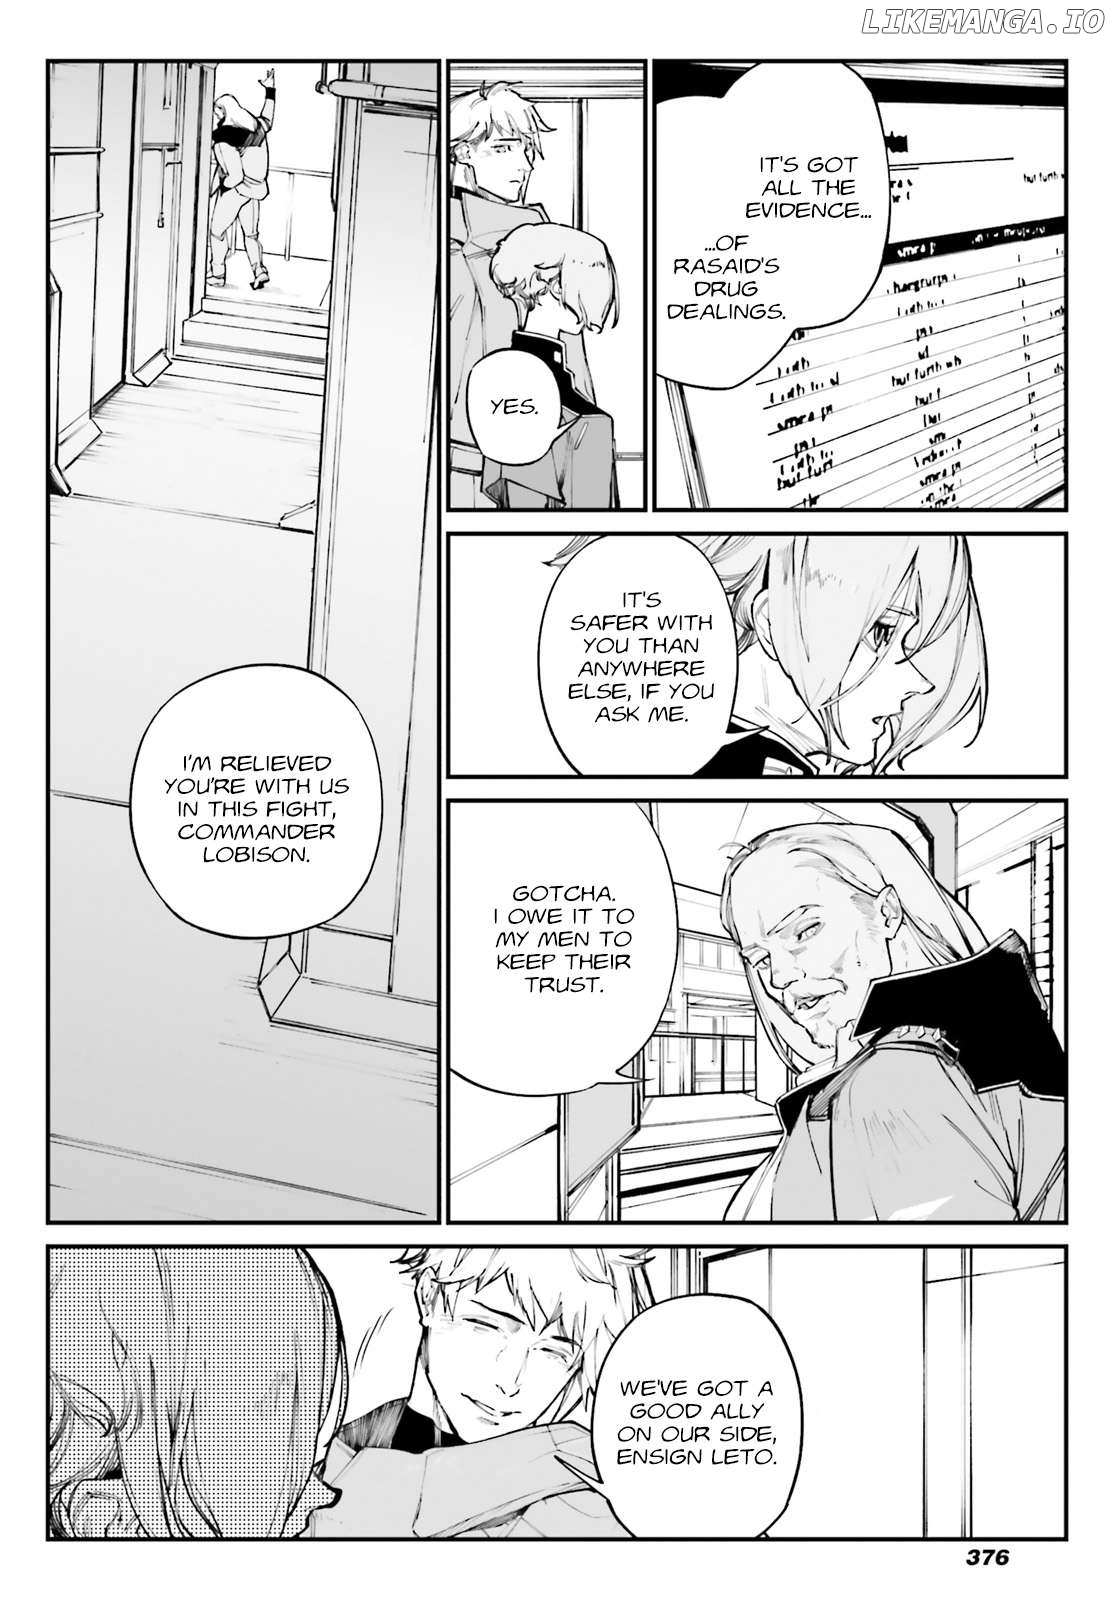 Mobile Suit Gundam Wearwolf Chapter 7.5 - page 3